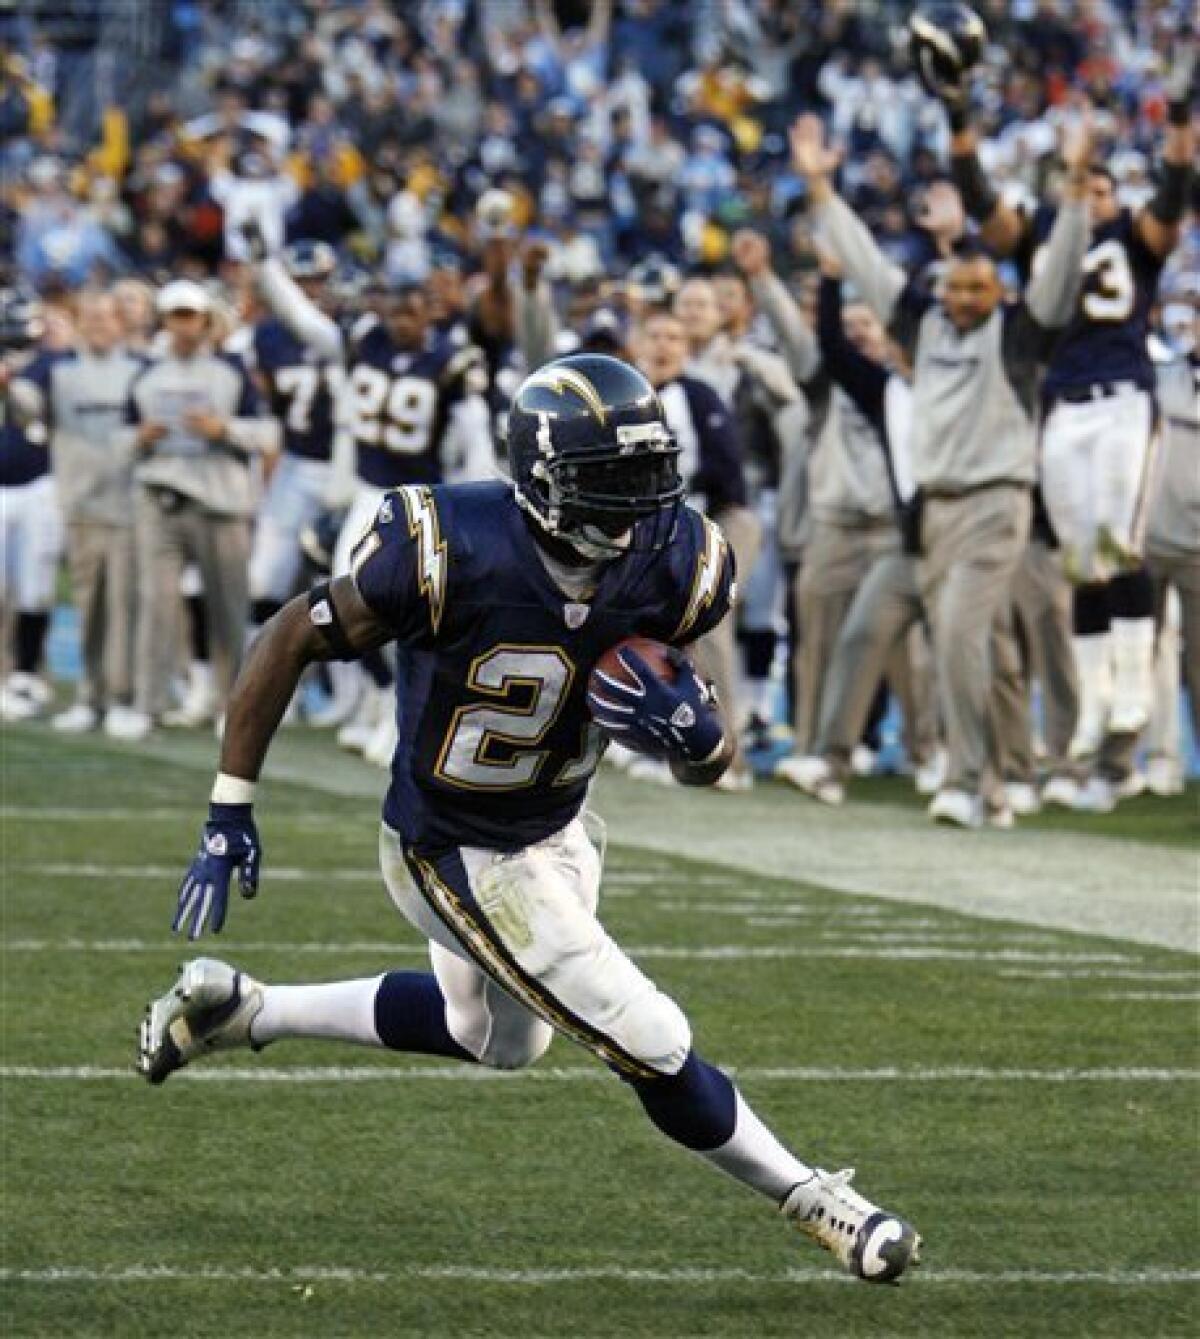 FILE - This Dec. 10, 2006 file photo shows San Diego Chargers running back LaDainian Tomlinson turning the corner on a seven-yard touchdown run during the fourth quarter of the Chargers' 48-20 victory over the Denver Broncos in a football game in San Diego. Two years after leaving under unhappy circumstances, Tomlinson returns to the Chargers to sign a one-day contract and then announce his retirement after 11 mostly brilliant NFL seasons. (AP Photo/Denis Poroy, File) — AP